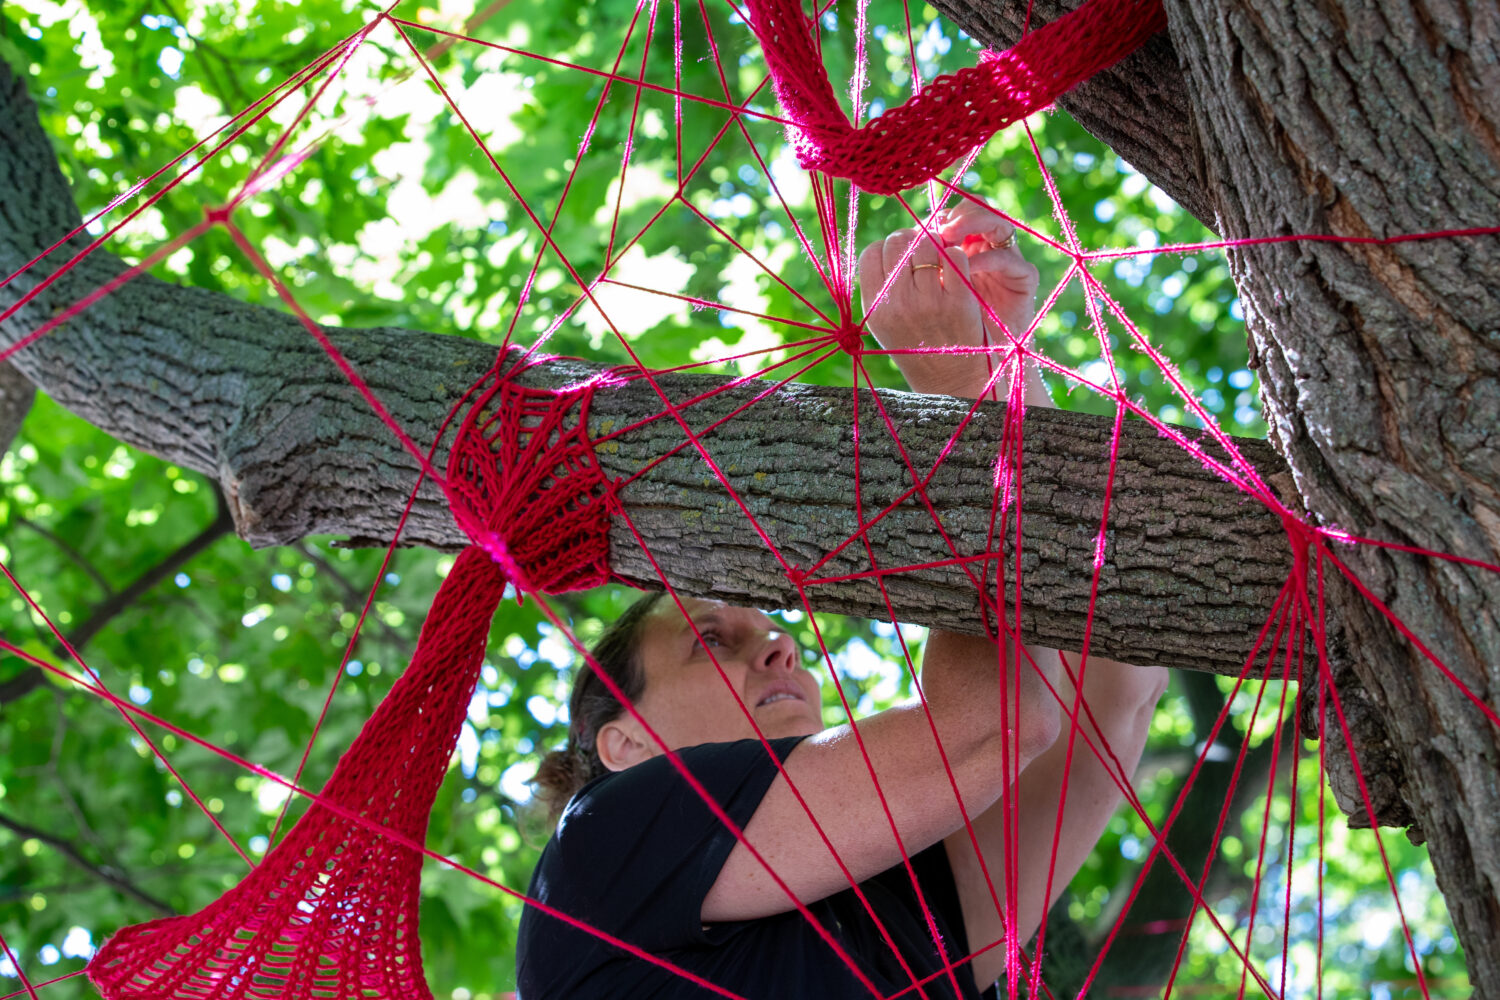 Tracey-Mae chambers installing the red string in a tree